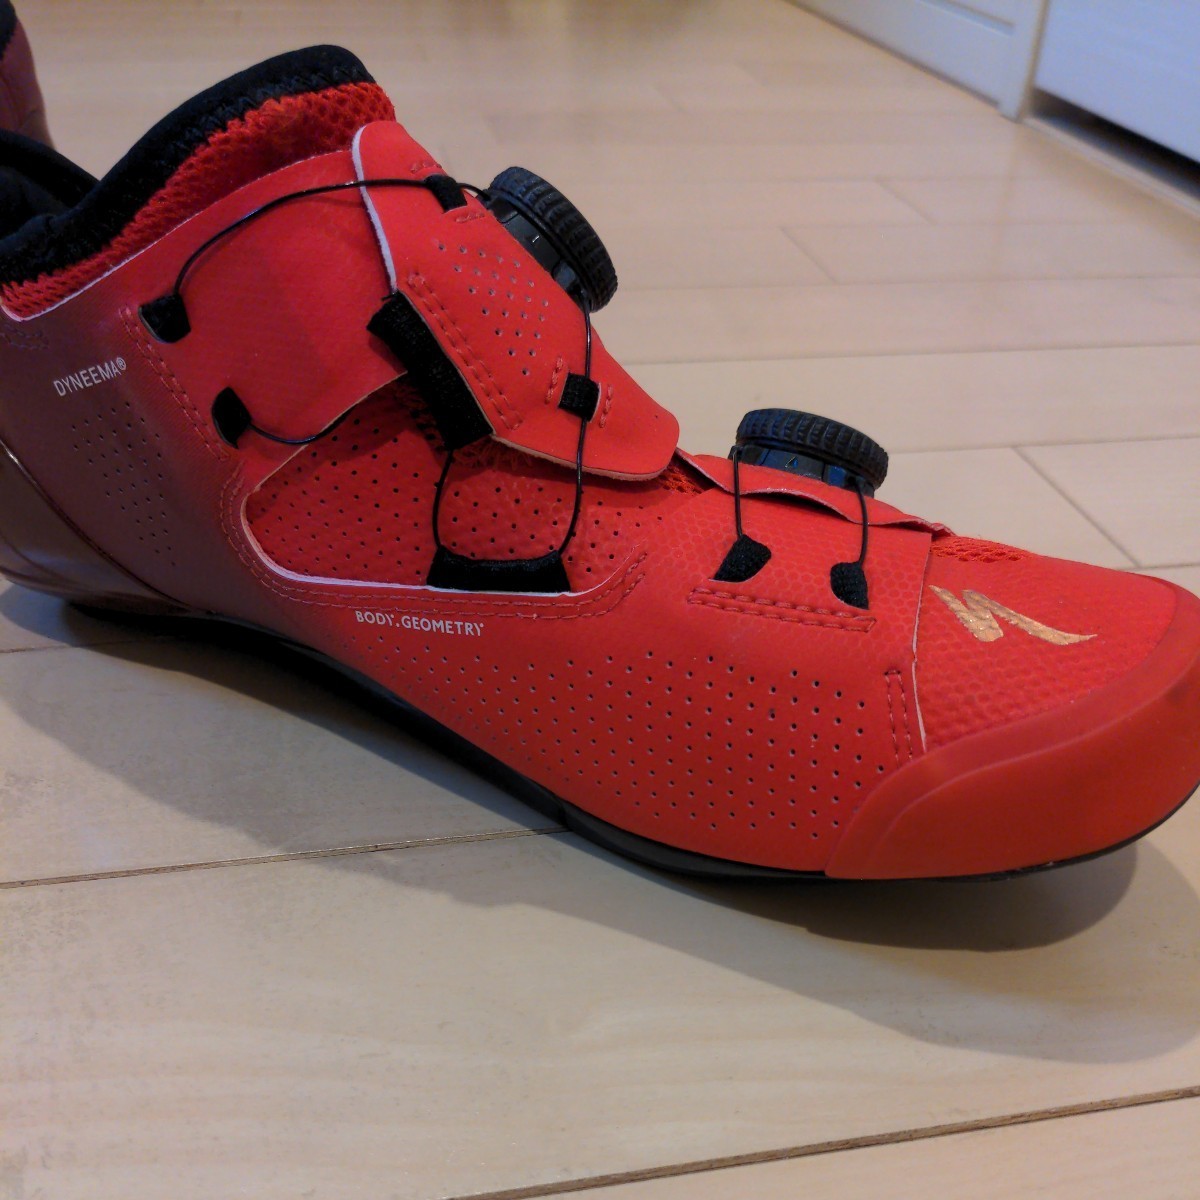 S-WORKS ARES ROAD SHOES 39.0の画像6